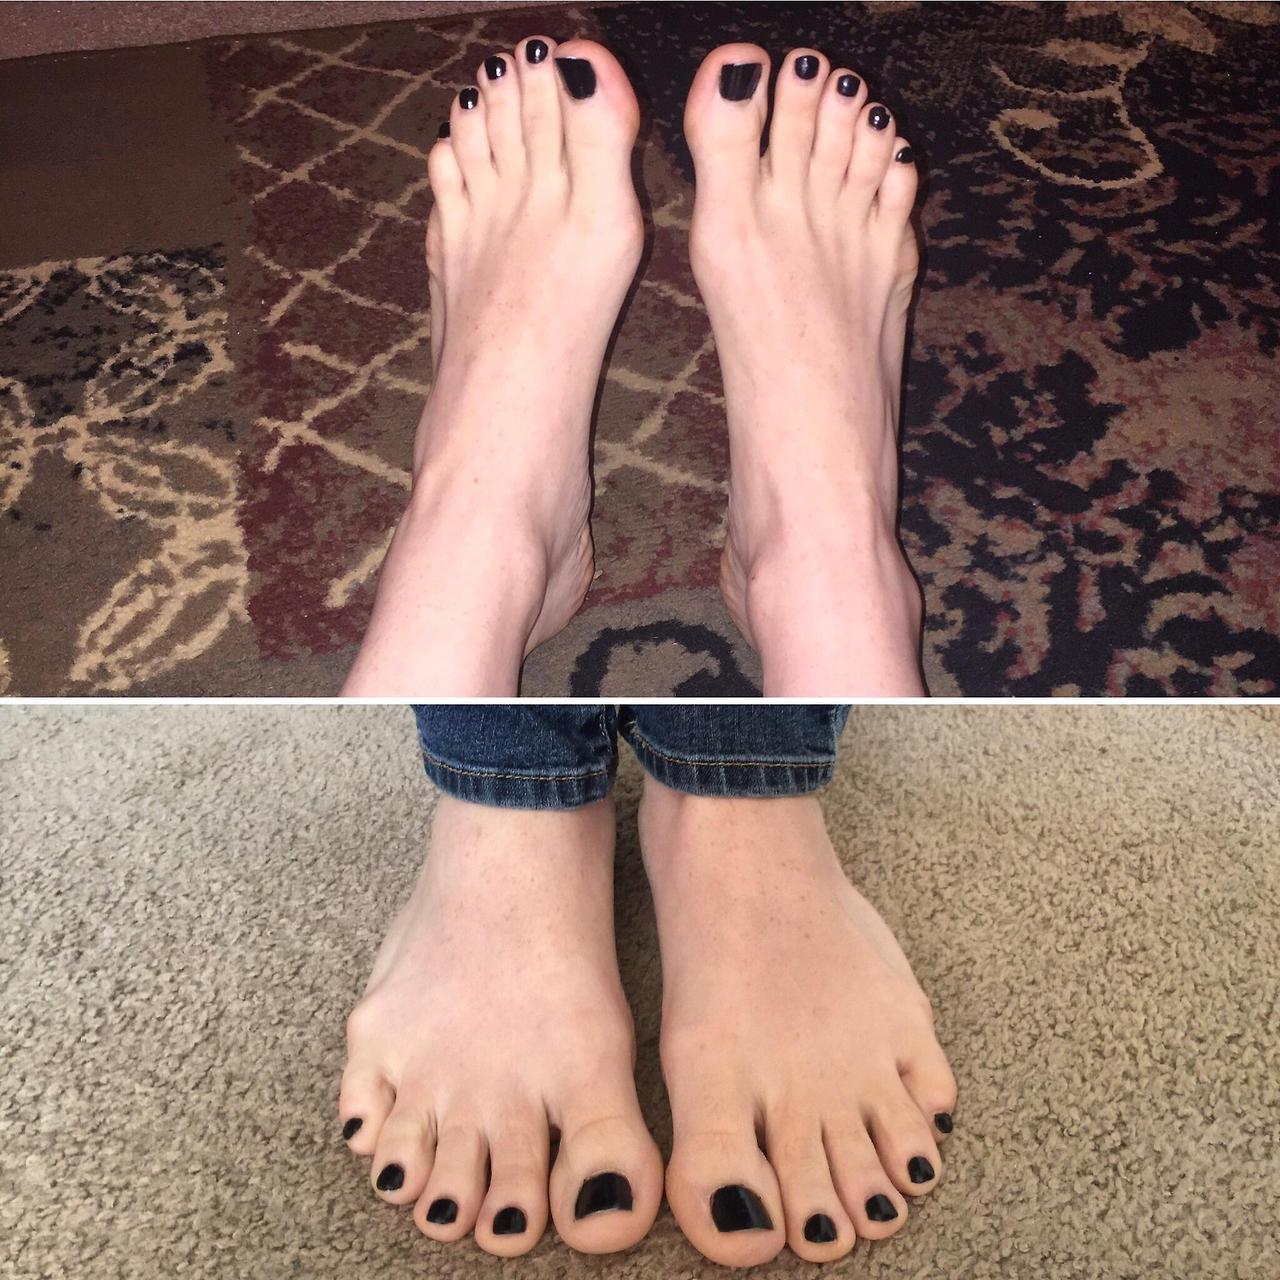 This Is My First Post Curious What You All Think Feet Toes Footfetis